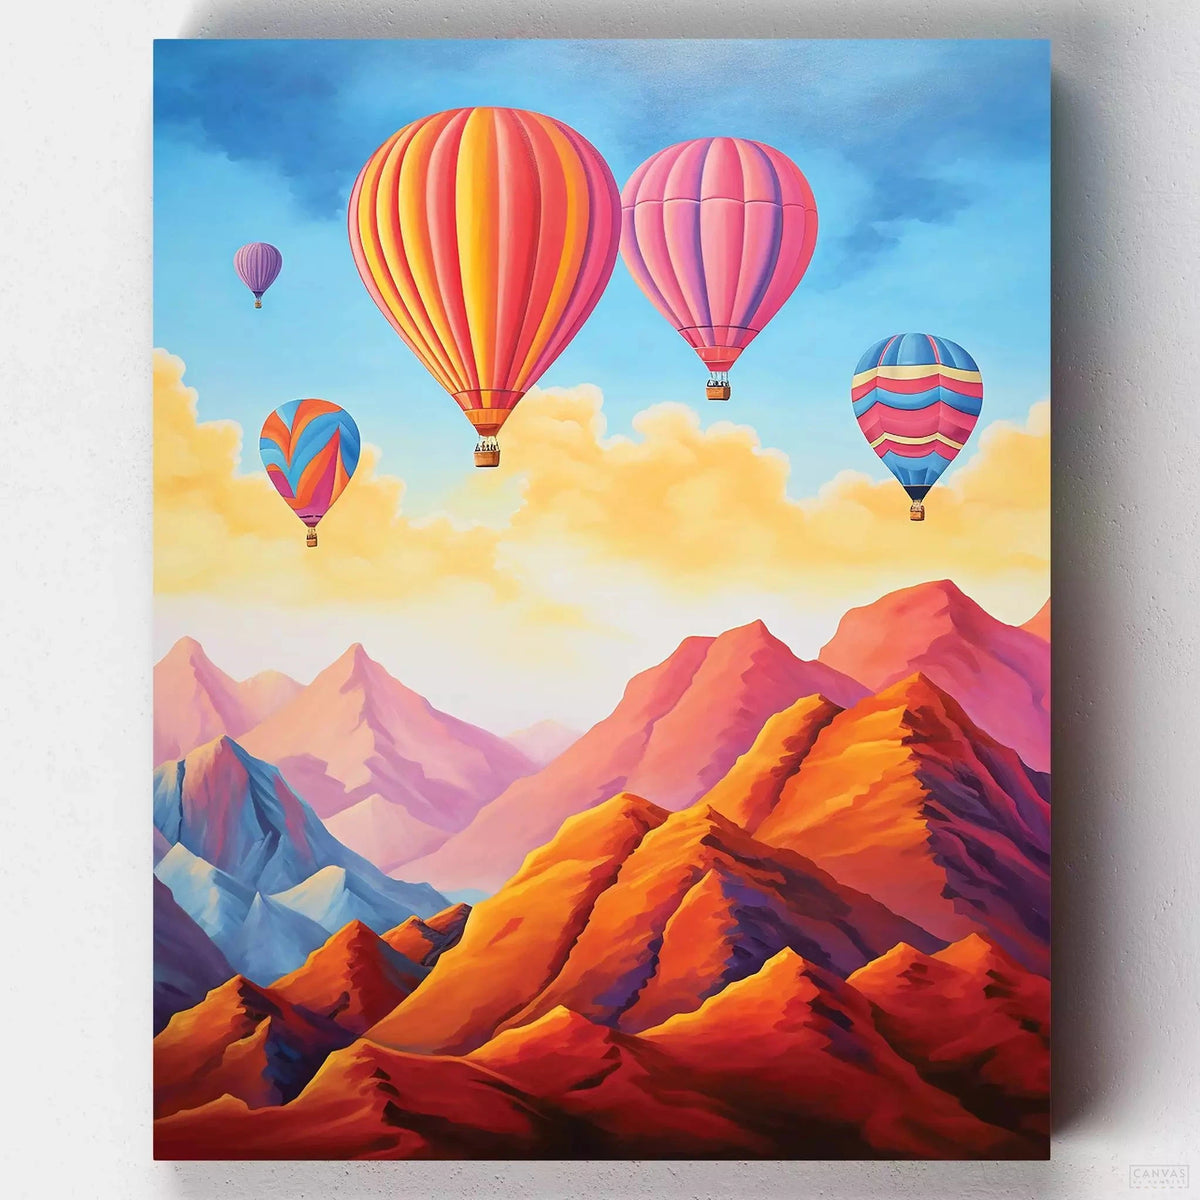 Skyward Balloons - Paint by Numbers-Paint a serene sky adventure with 'Skyward Balloons'. Capture the beauty of balloons over mountains in this vibrant paint by numbers kit.-Canvas by Numbers